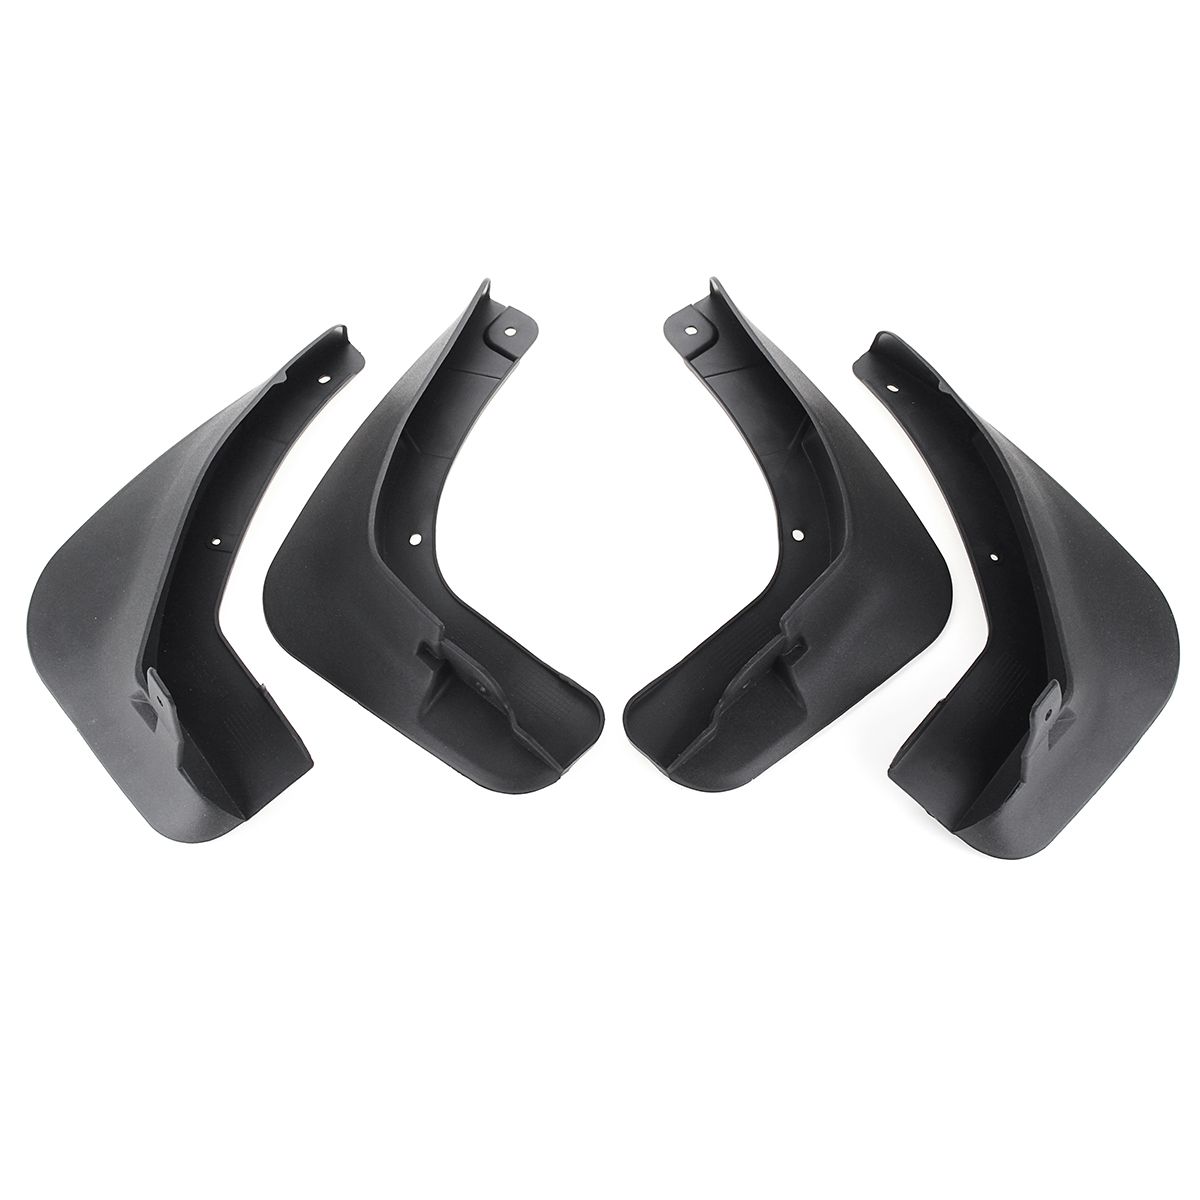 4Pcs-Front-And-Rear-Car-Mudguards-For-Renault-Fluence-08-16-1393222